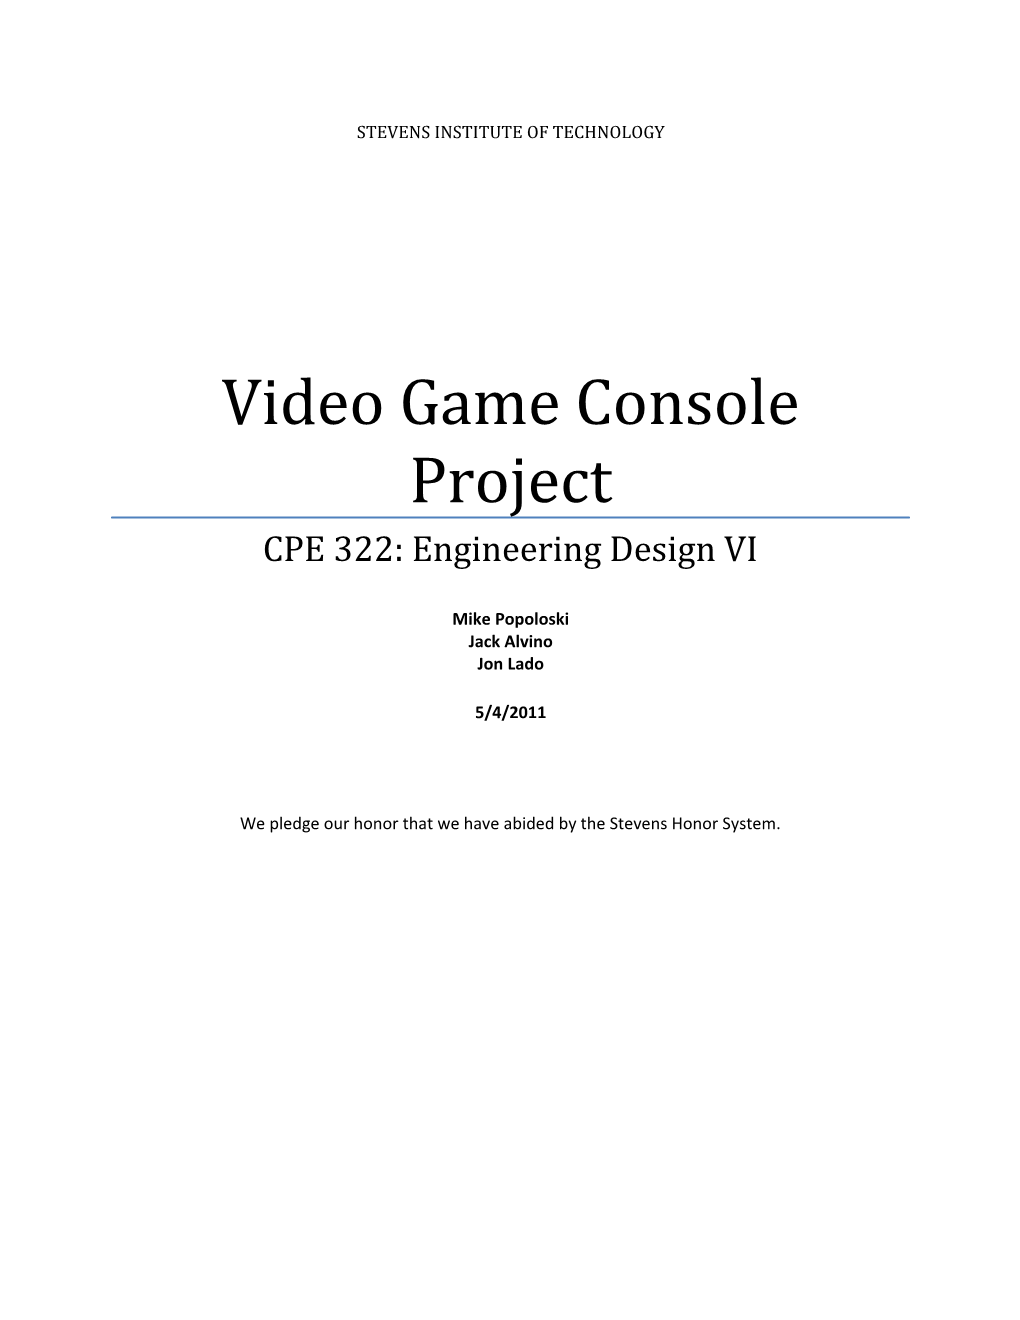 Video Game Console Project